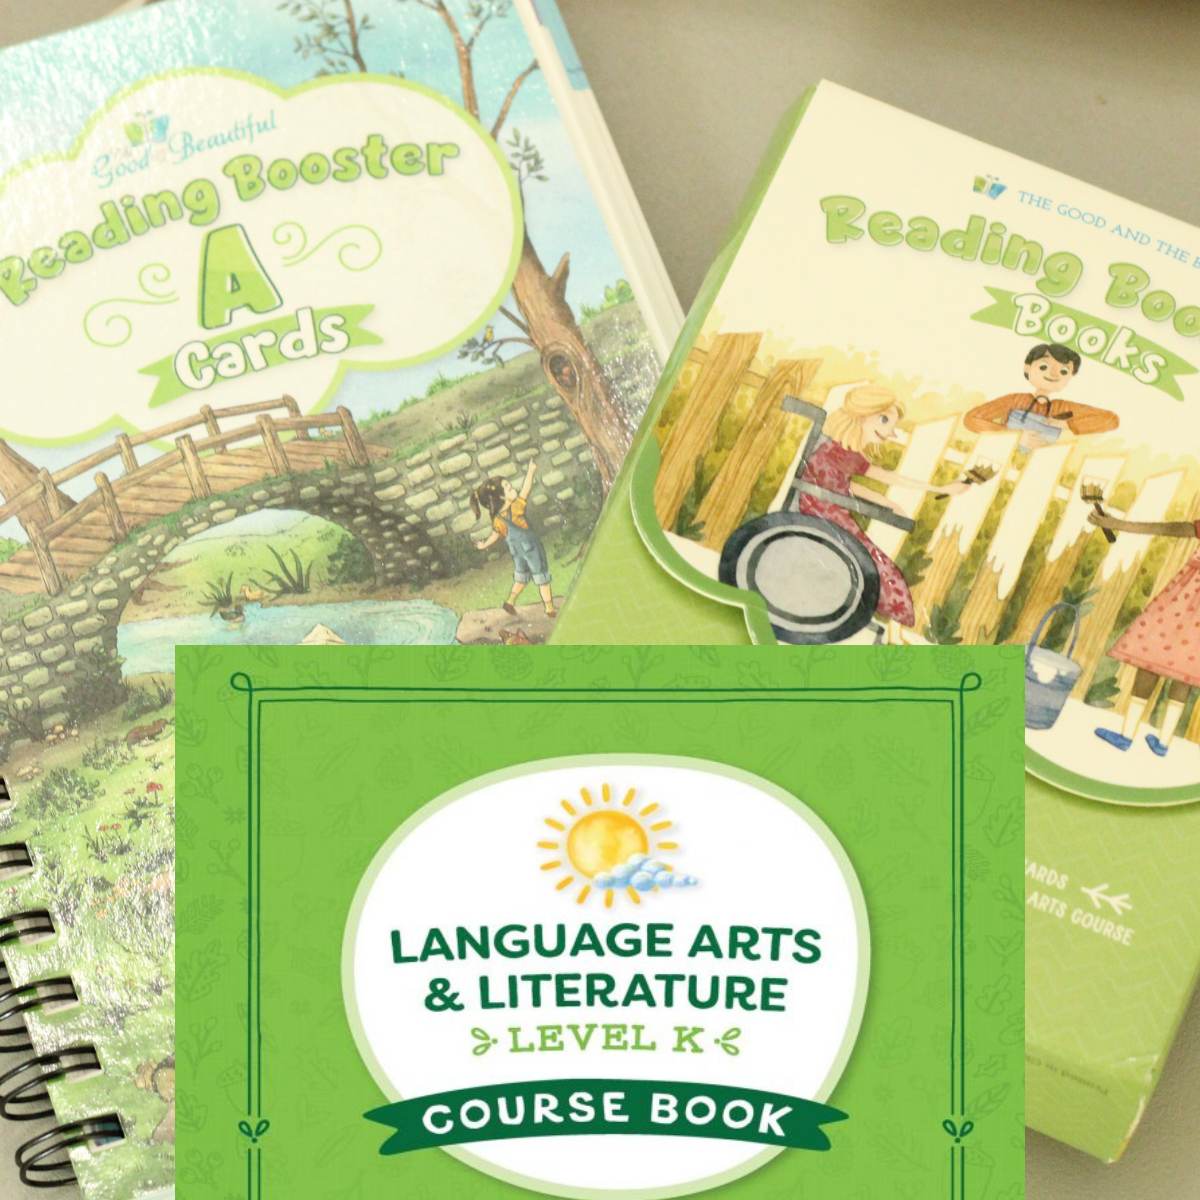 the good and the beautiful language arts level k course set